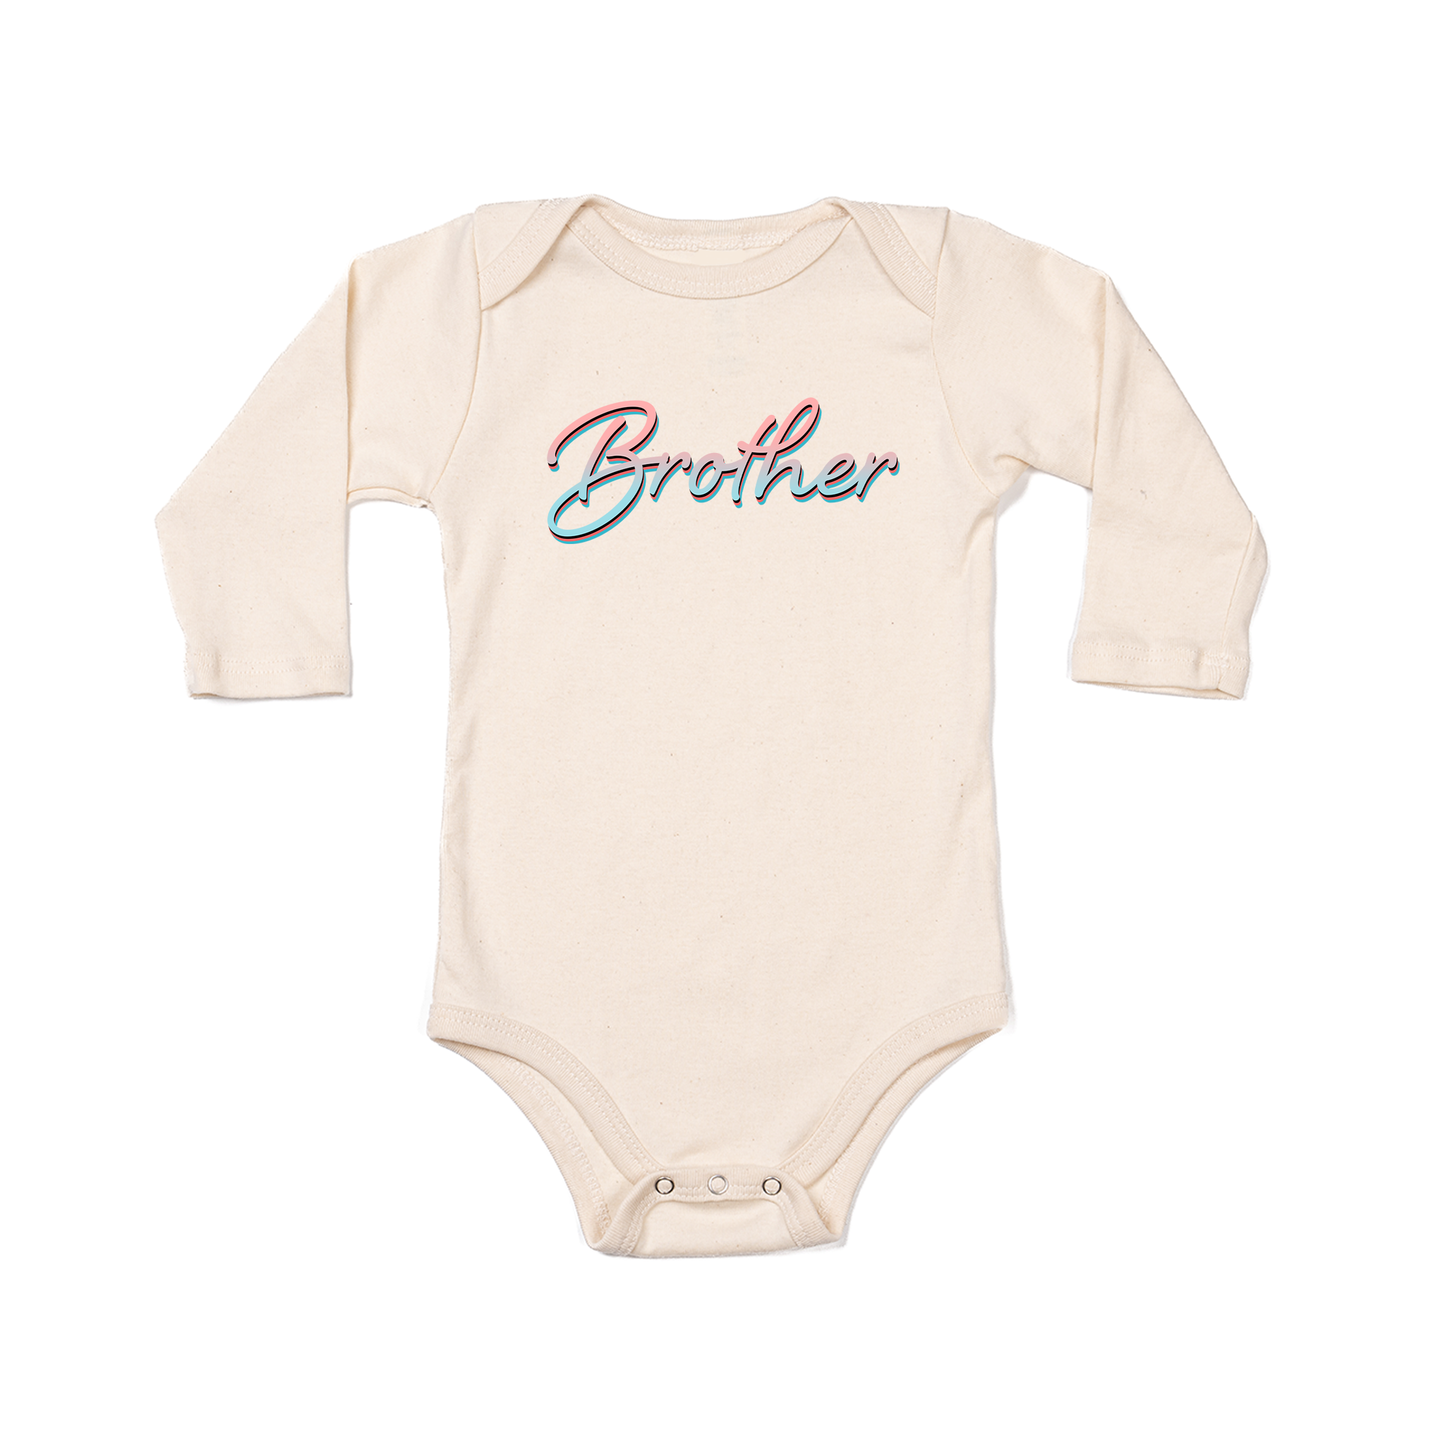 Brother (90's Inspired, Pink/Blue) - Bodysuit (Natural, Long Sleeve)